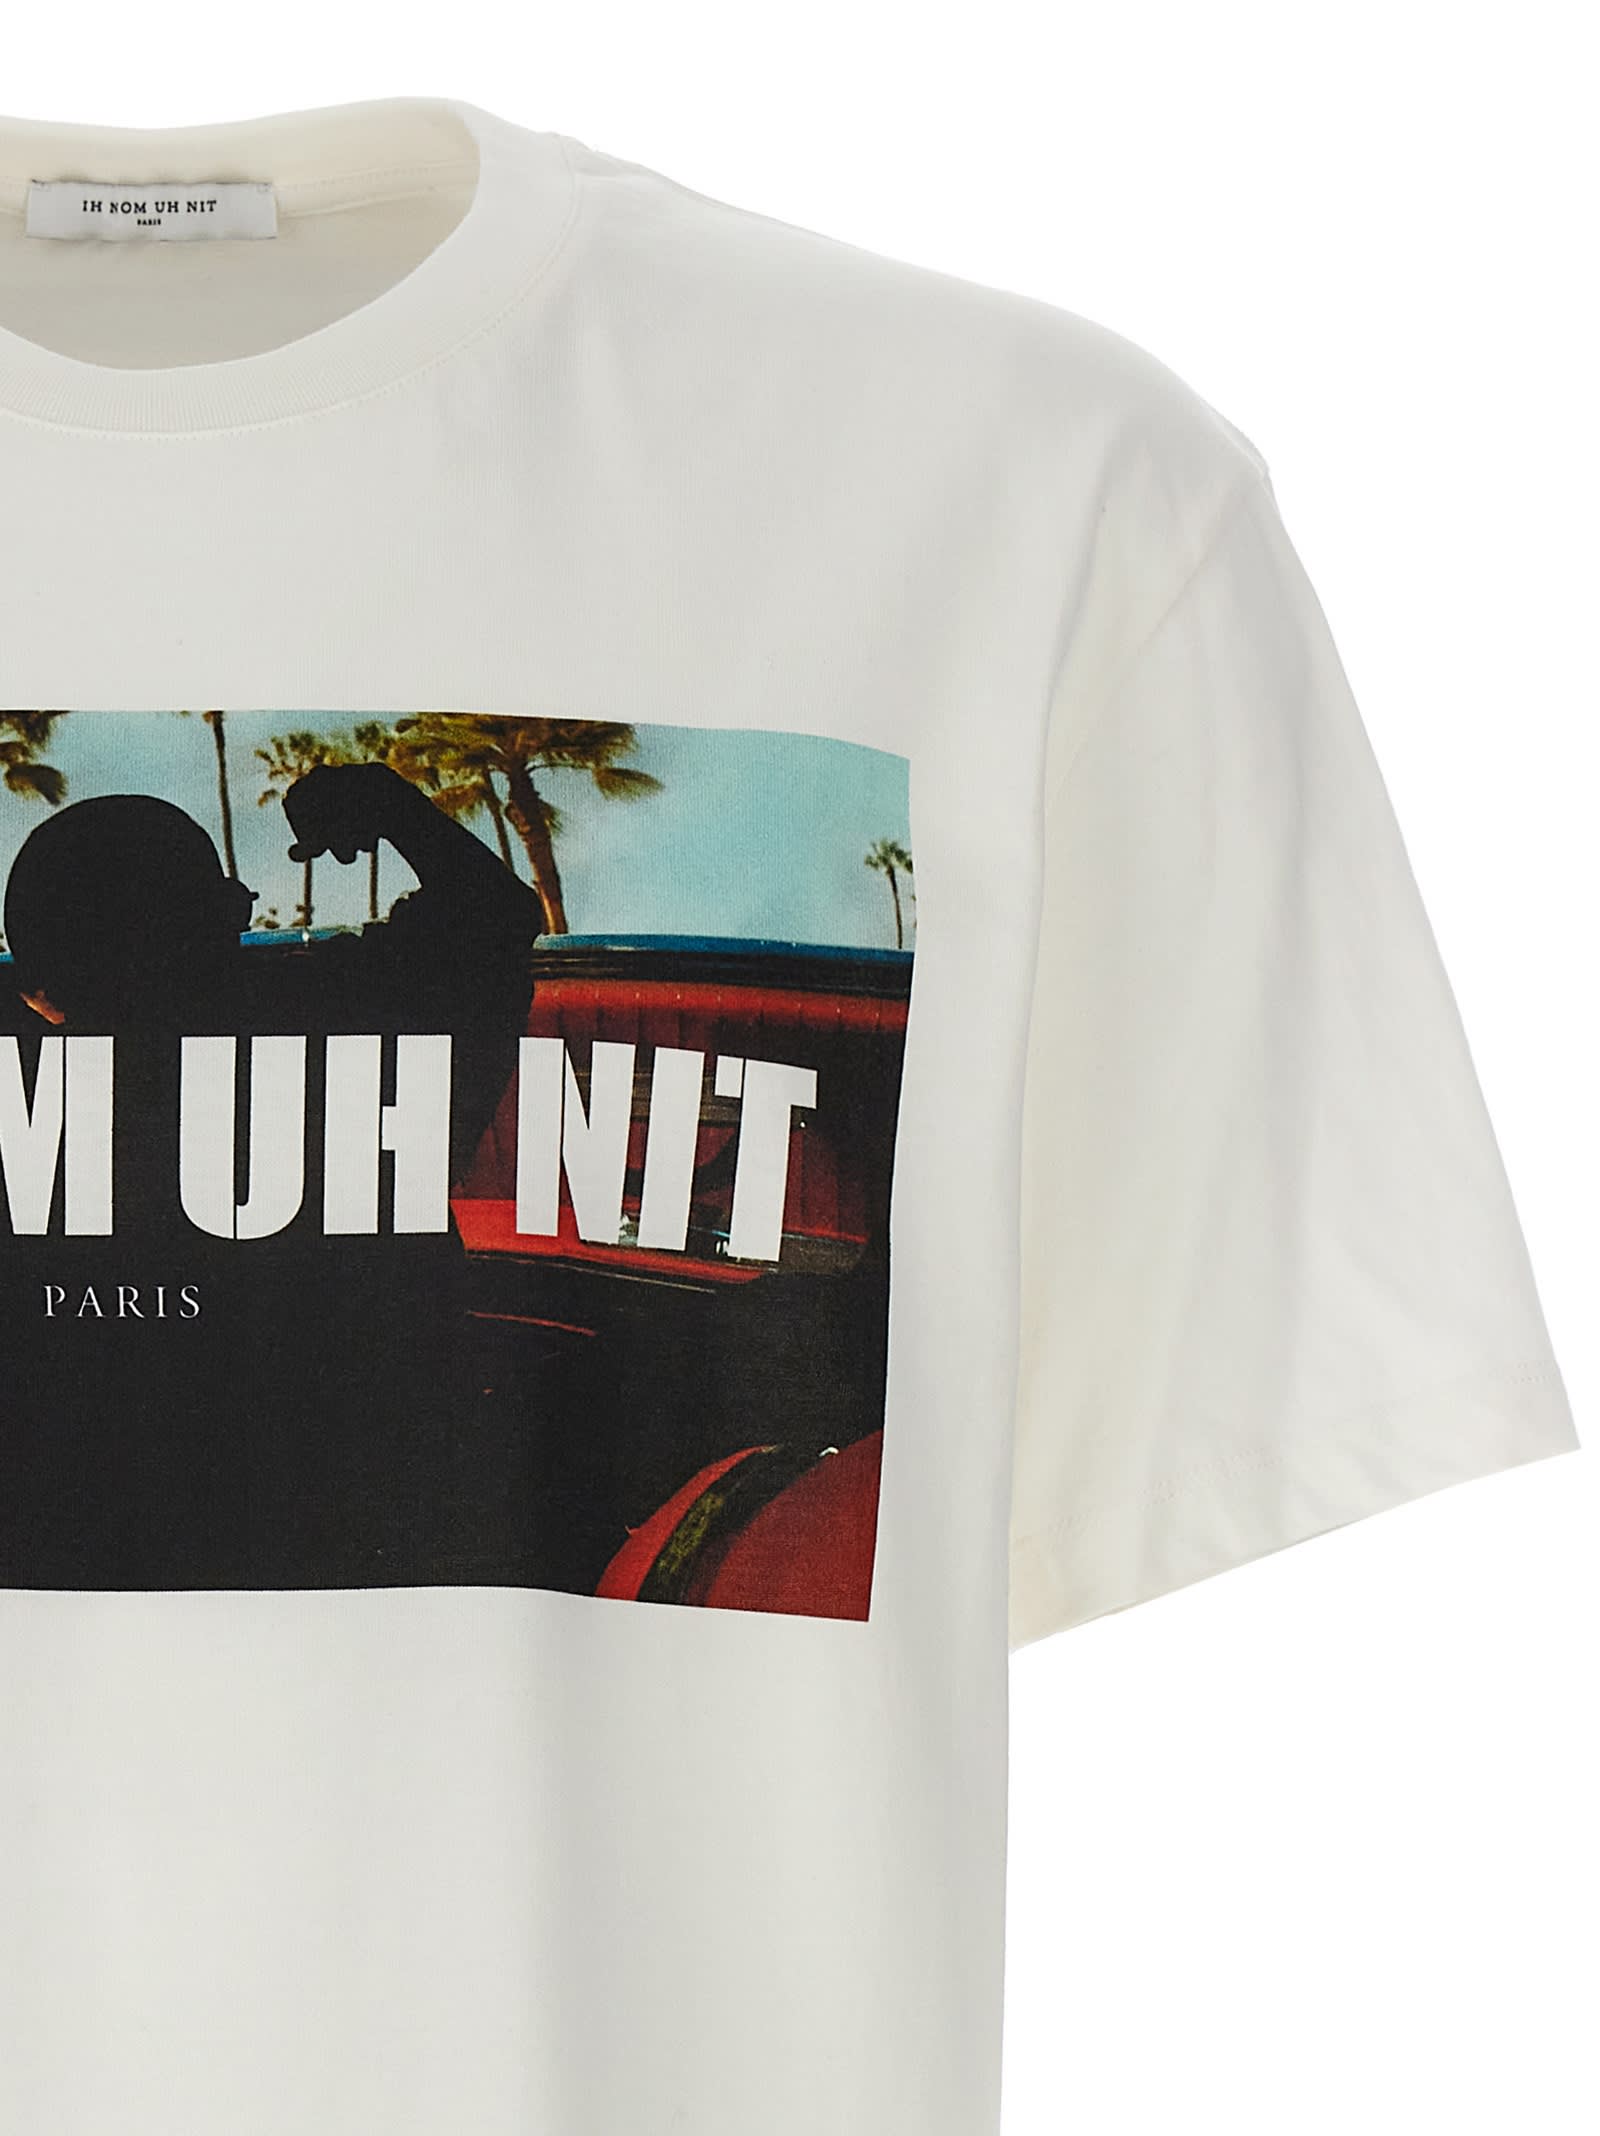 Shop Ih Nom Uh Nit Palms And Car T-shirt In White